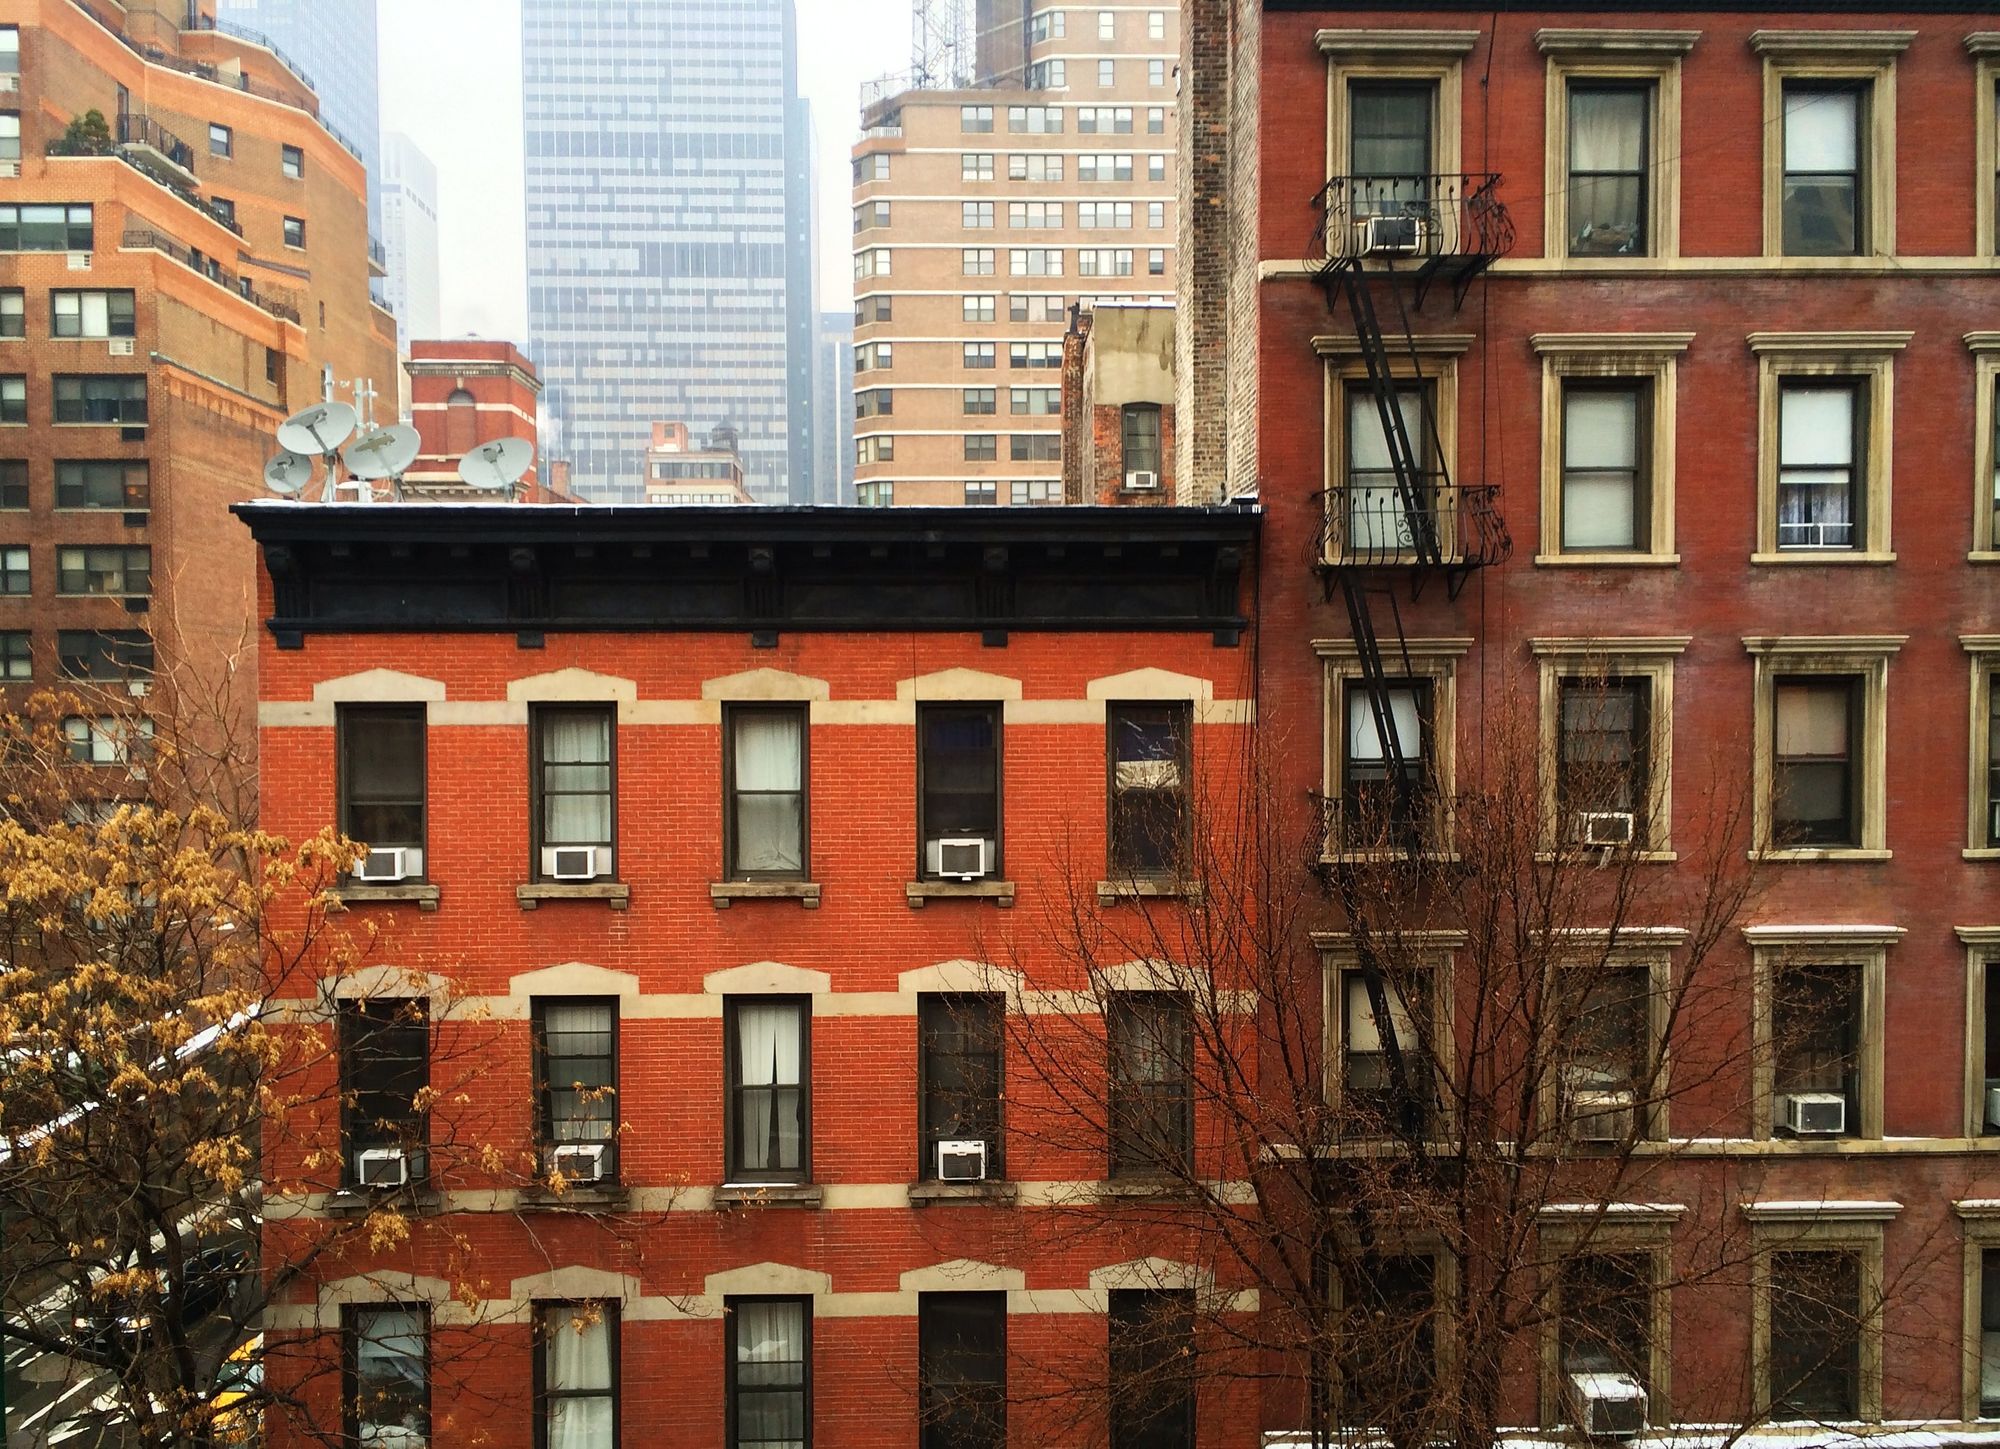 2019 New Rental Laws for New York Landlords and Renters Tellus Talk